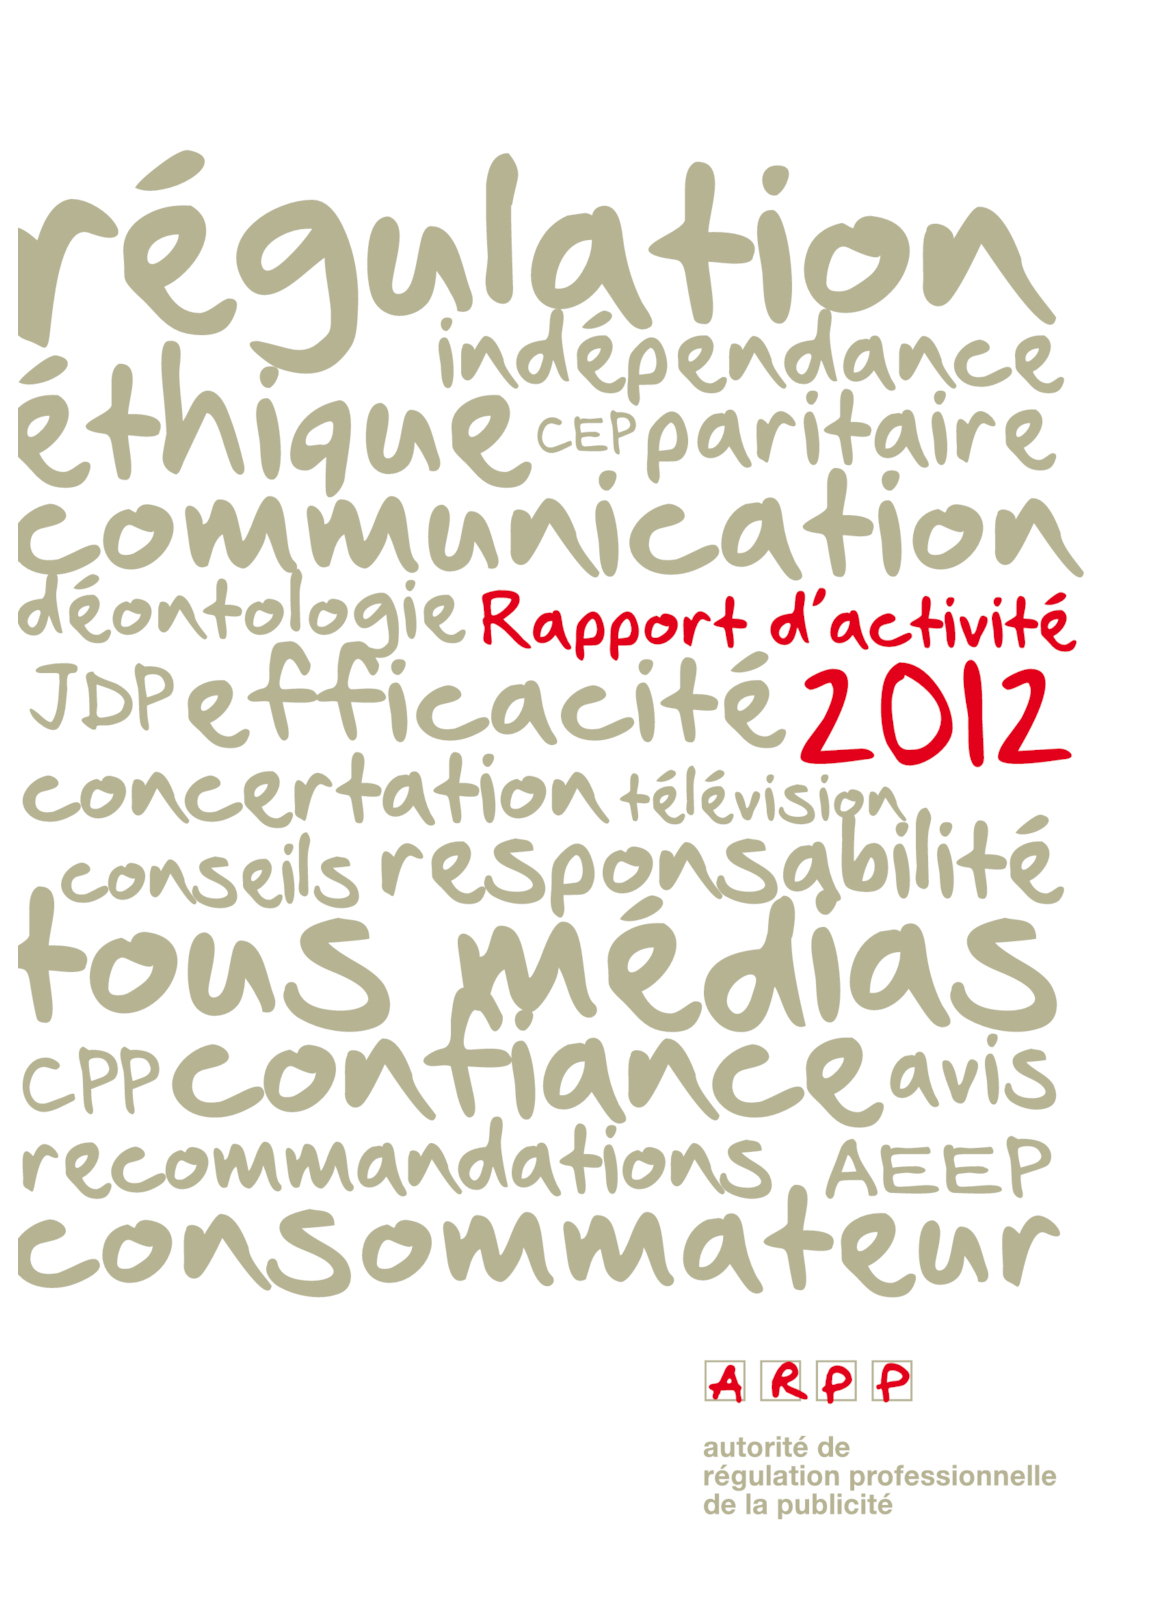 Rapport Annuel 2012